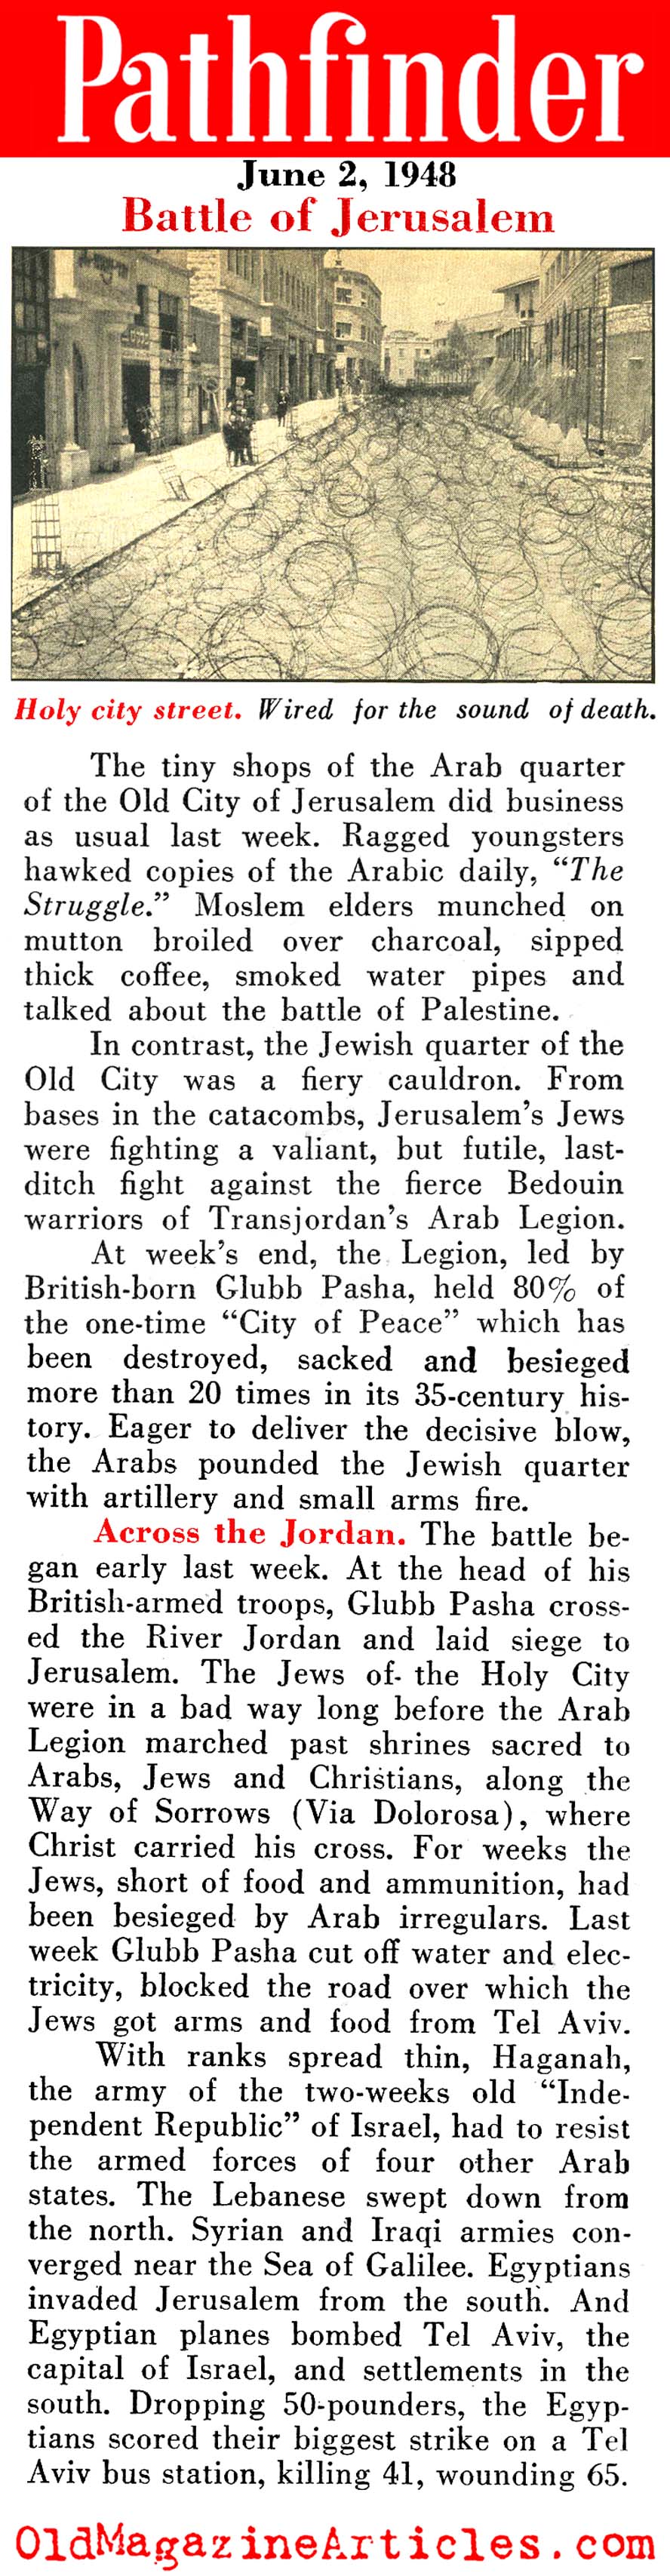 The Battle for the City of Peace (Pathfinder Magazine, 1948)